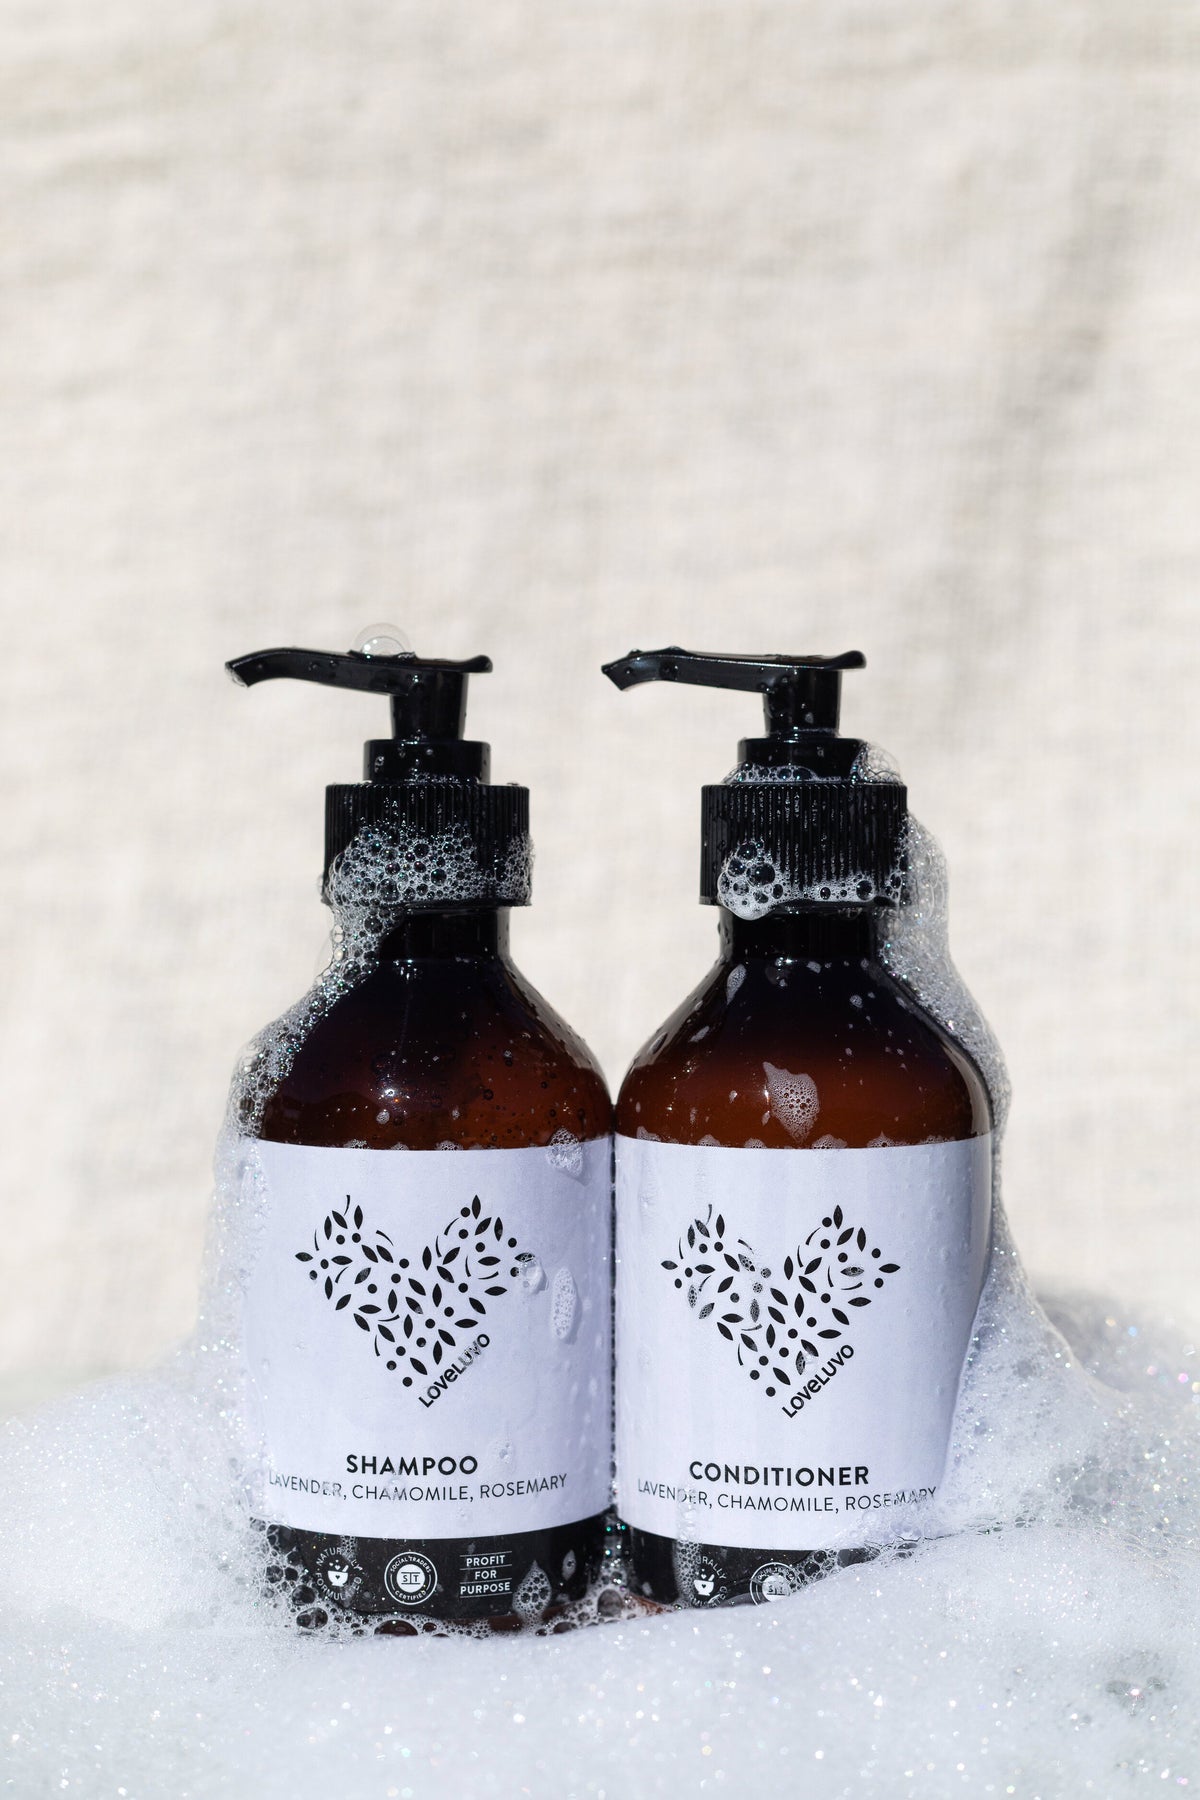 Shampoo + Conditioner Duo Scented with Lavender, Chamomile & Rosemary (2 x 500ml)